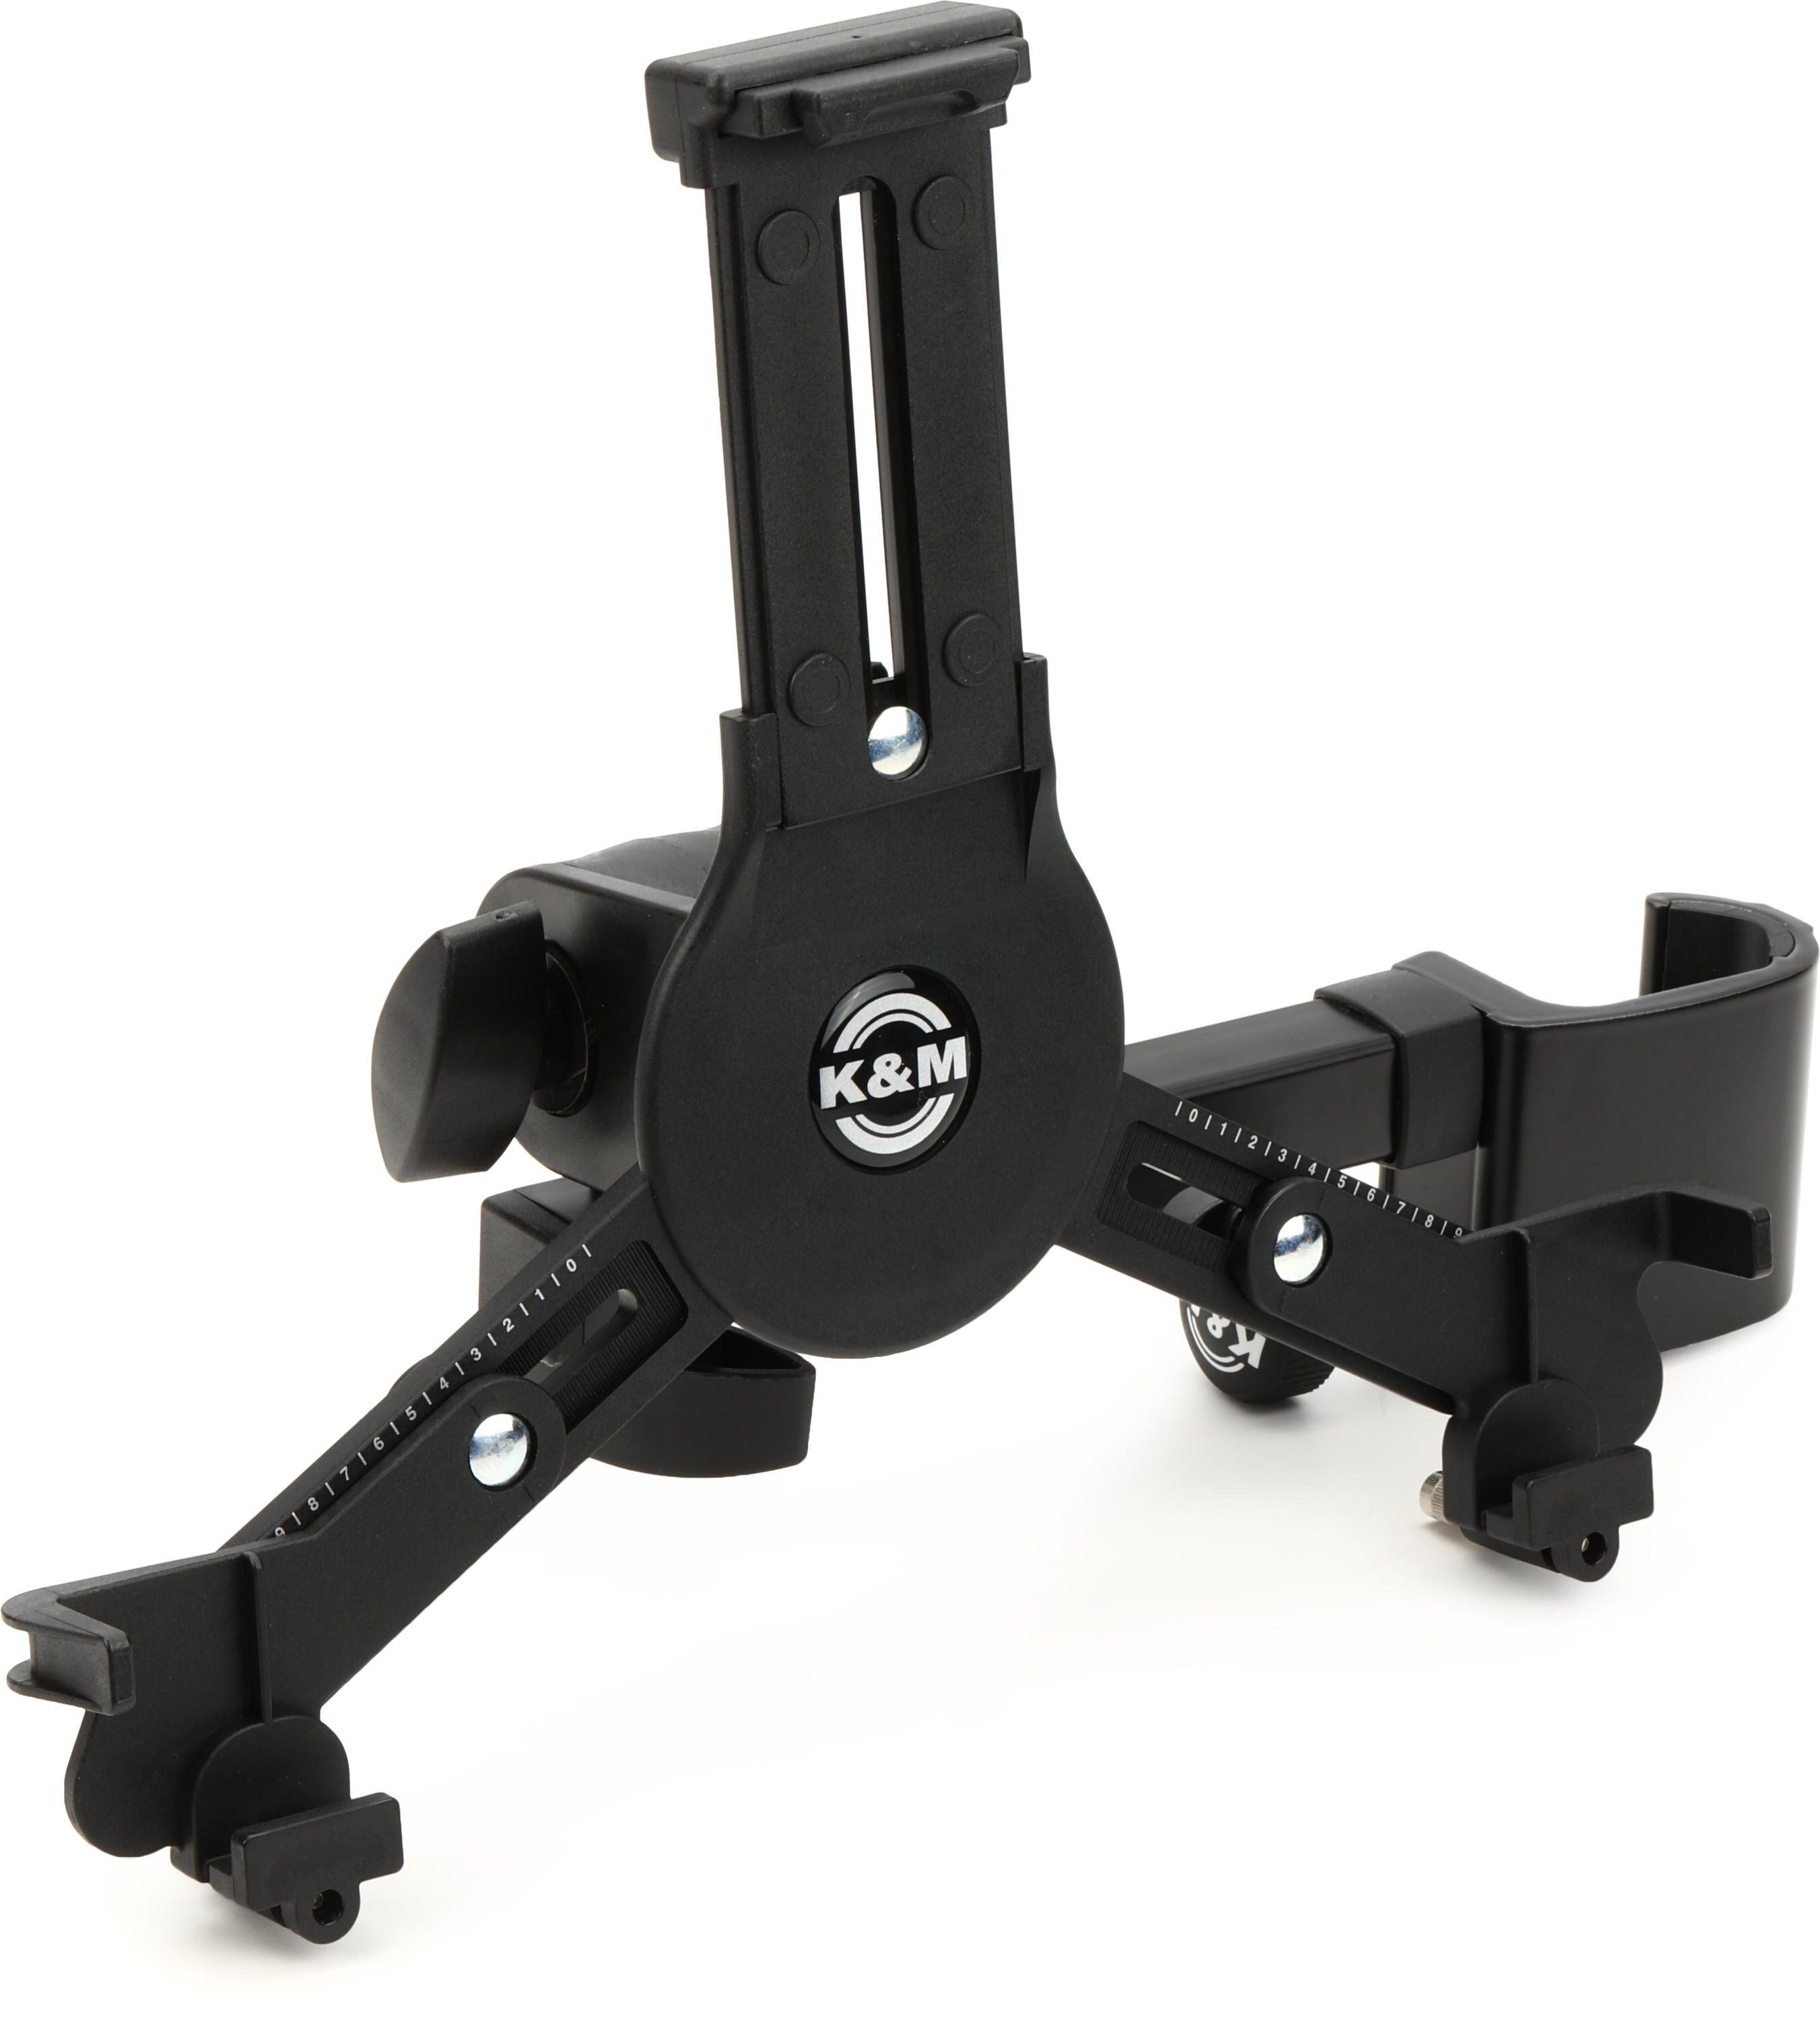 K&M 19791 Universal Tablet Holder - Clamp Mount for iPad/Tablet Height  222-334mm